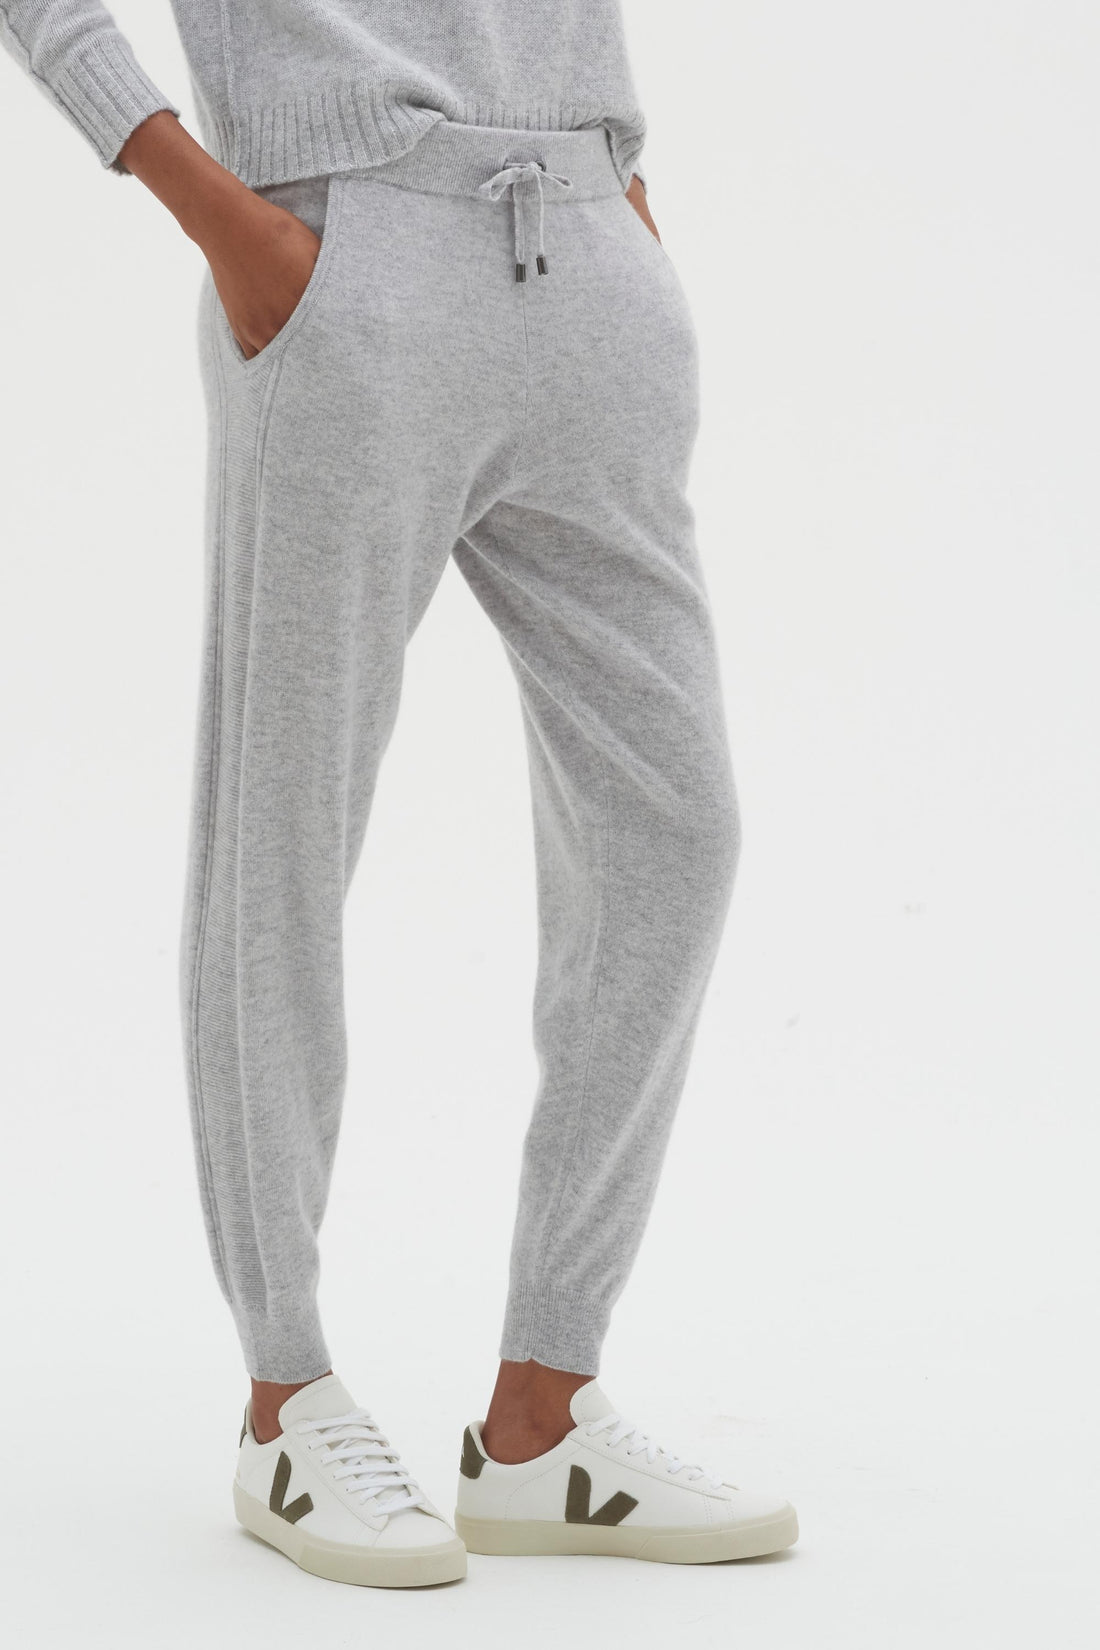 Cashmere Joggers - Made to Order